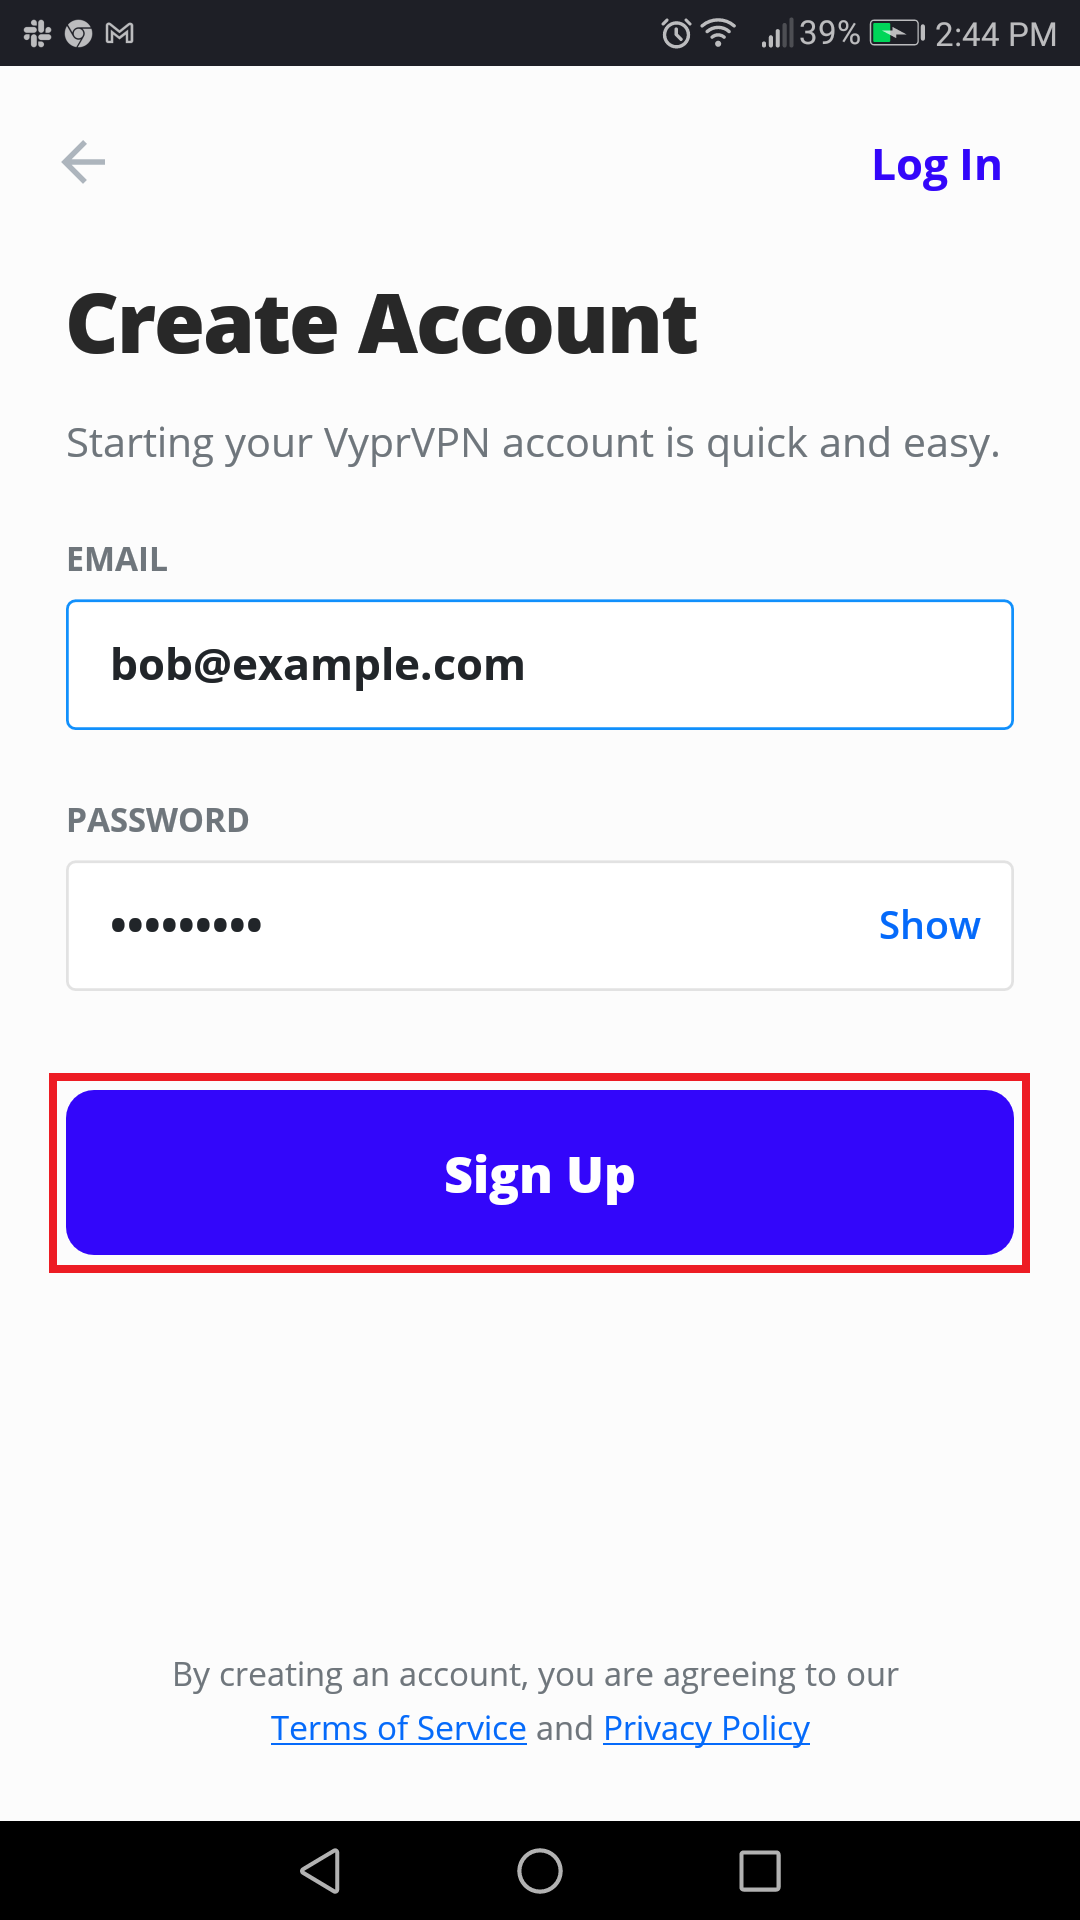 Vypr_App_-_Create_Account_Screen_-_Sign_Up_Selected.png